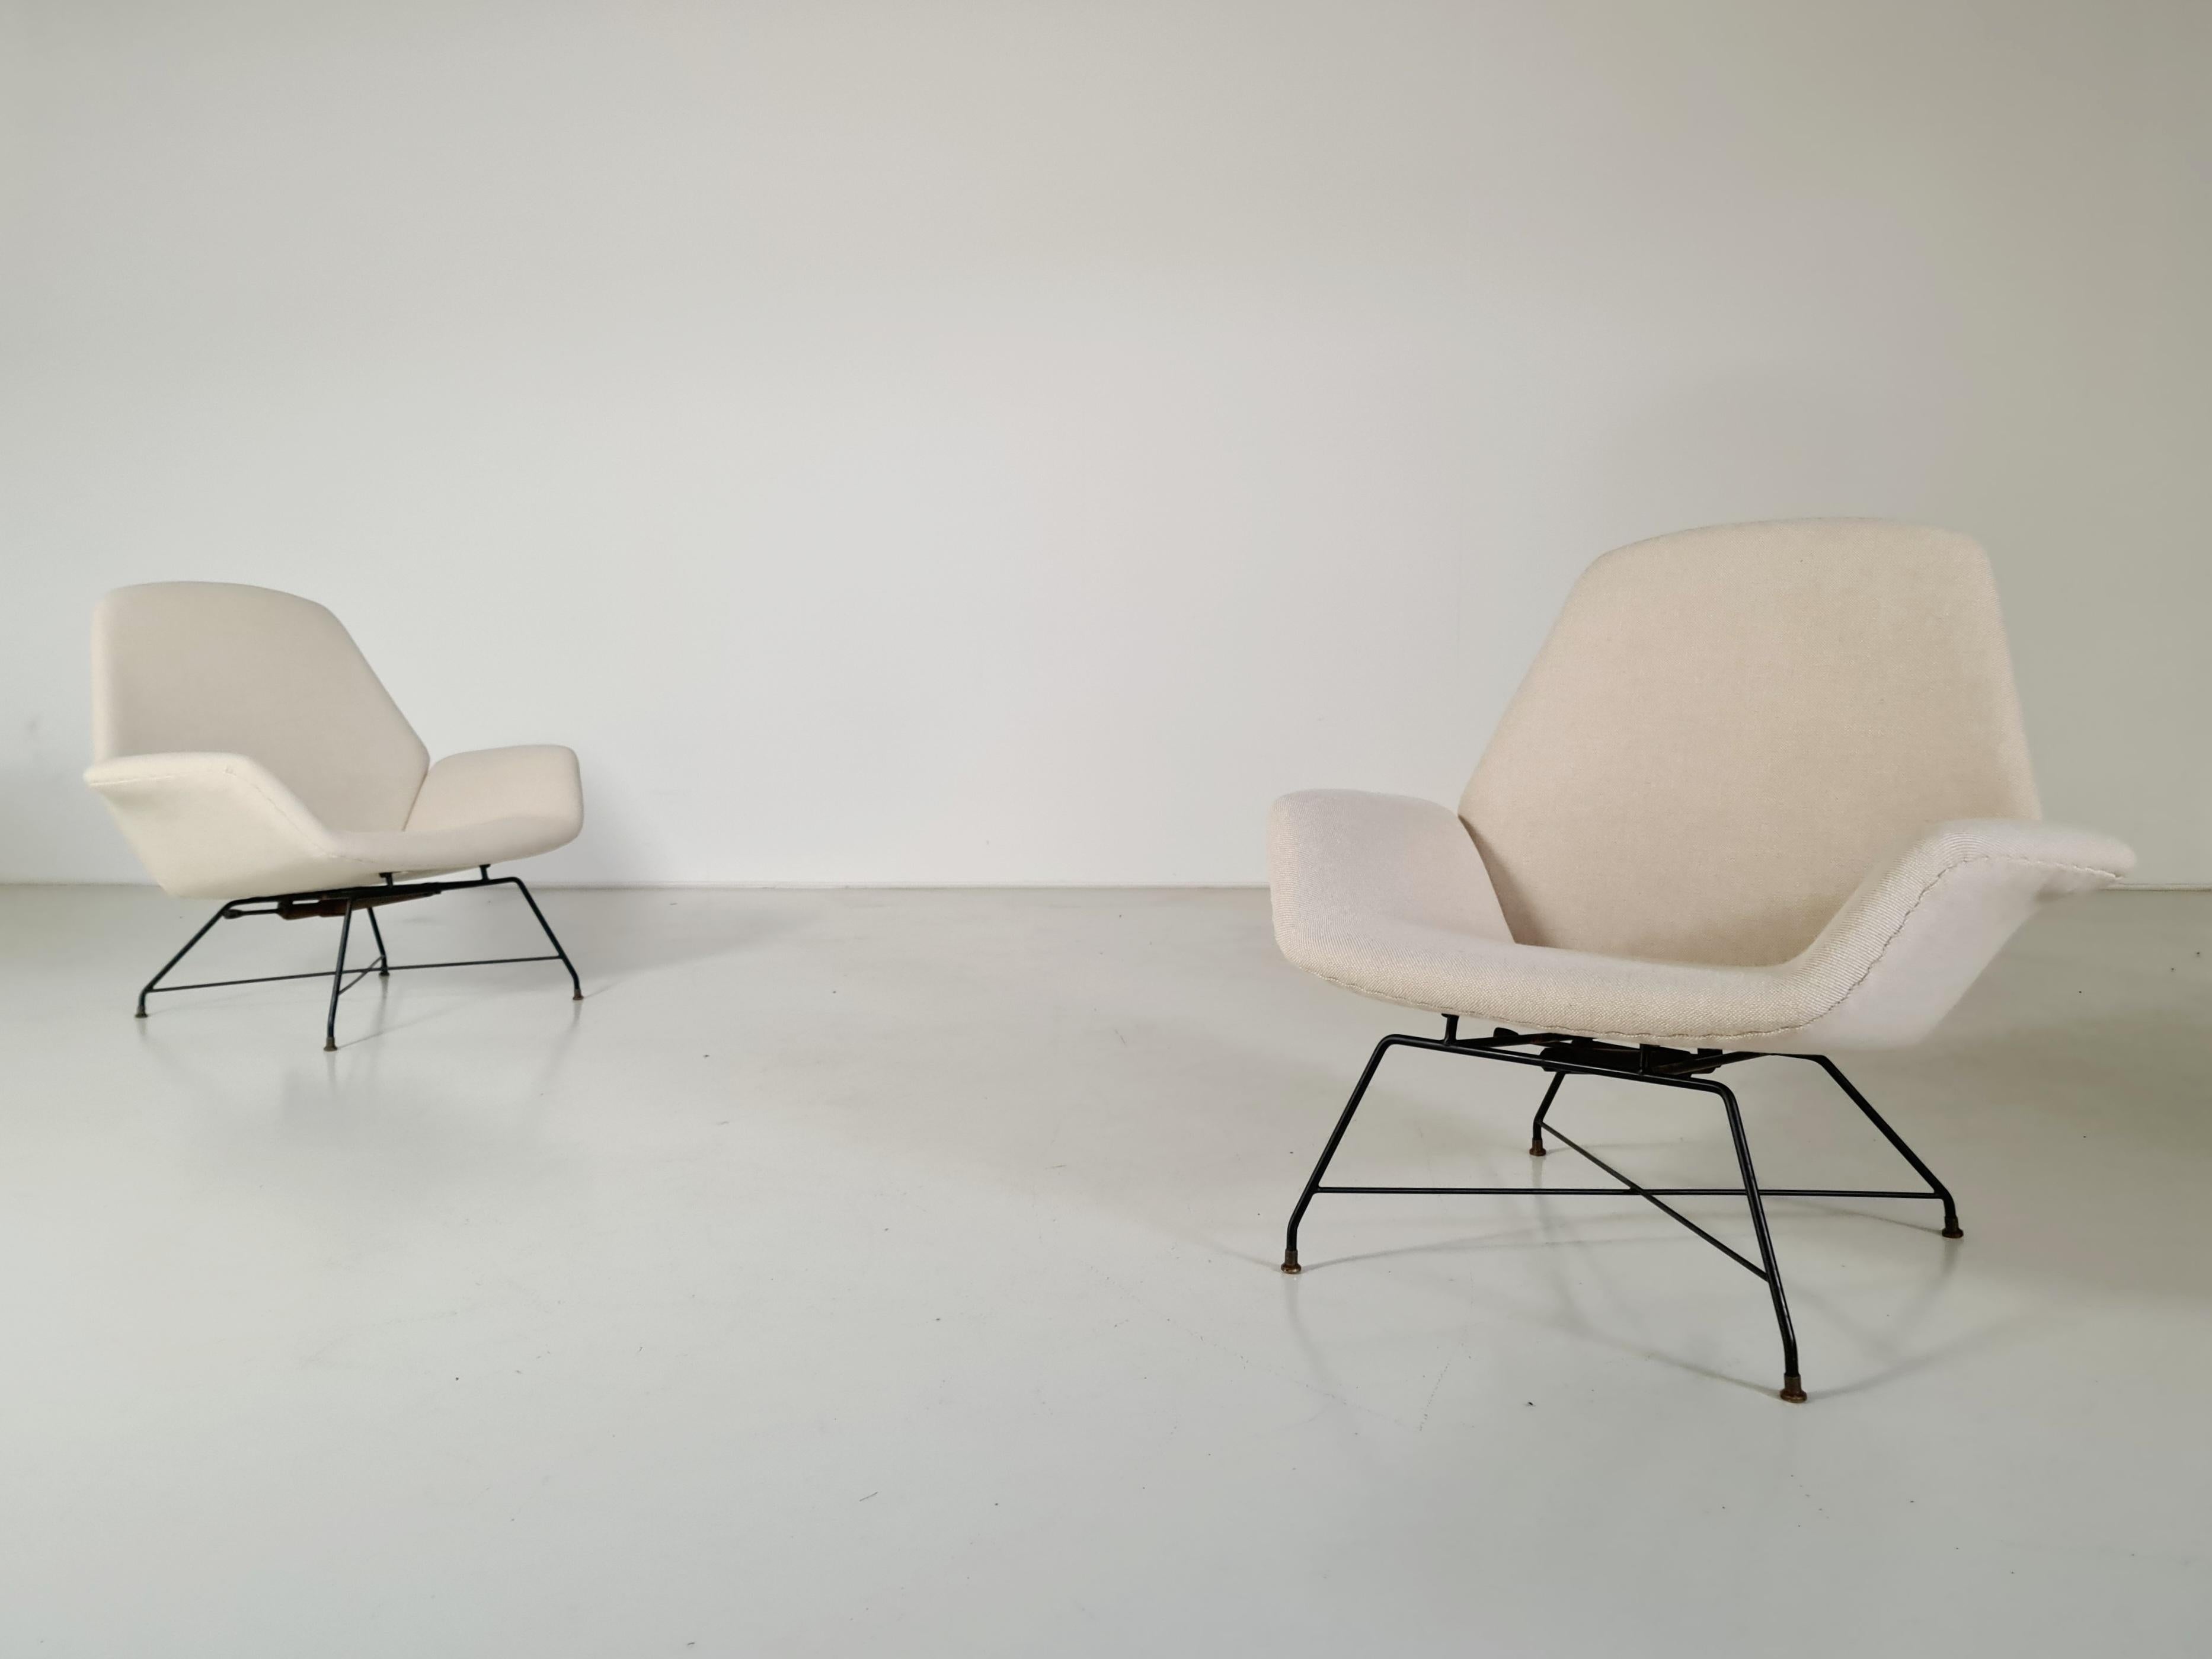 Wool ‘Lotus’ Lounge Chairs in cream wool fabric by Augusto Bozzi for Saporiti, 1960s For Sale